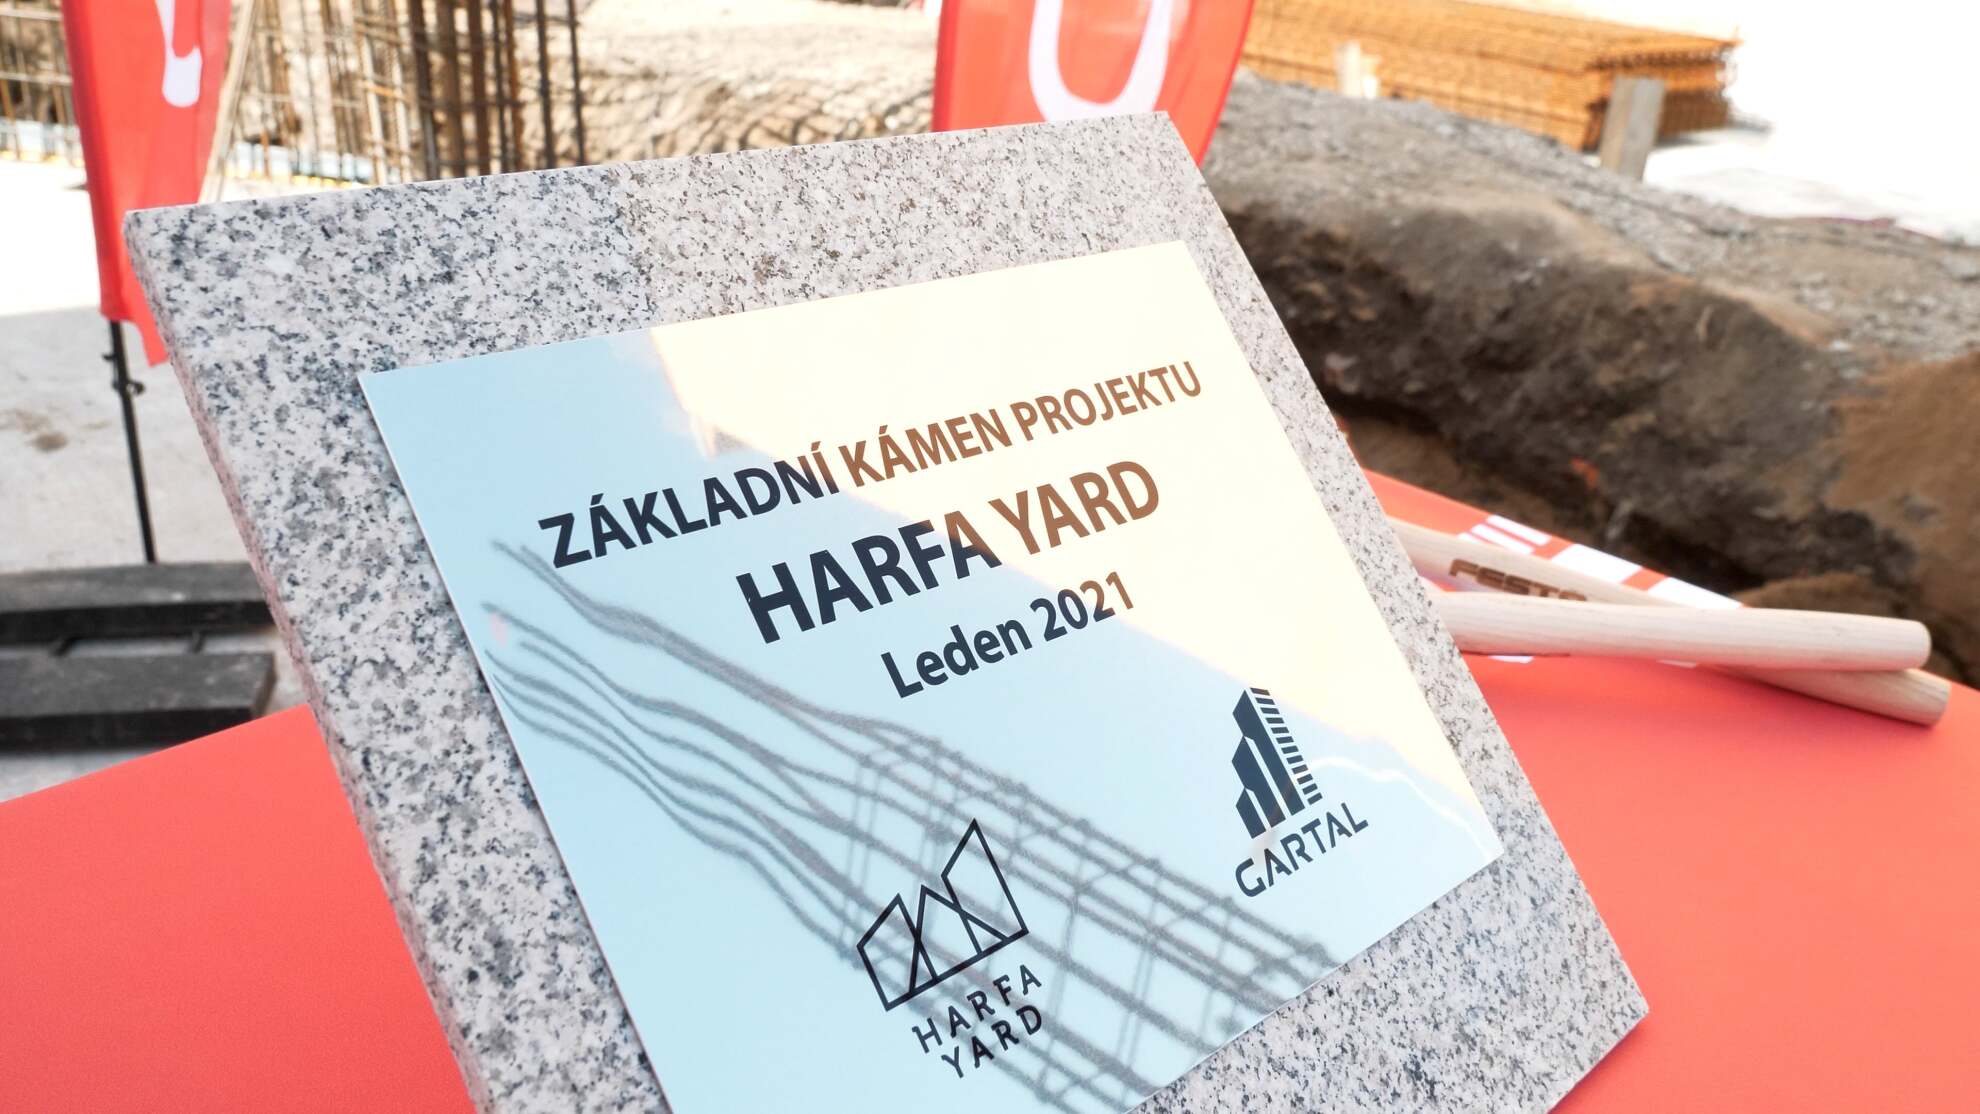 Laying the foundation stone of the Harfa Yard project 